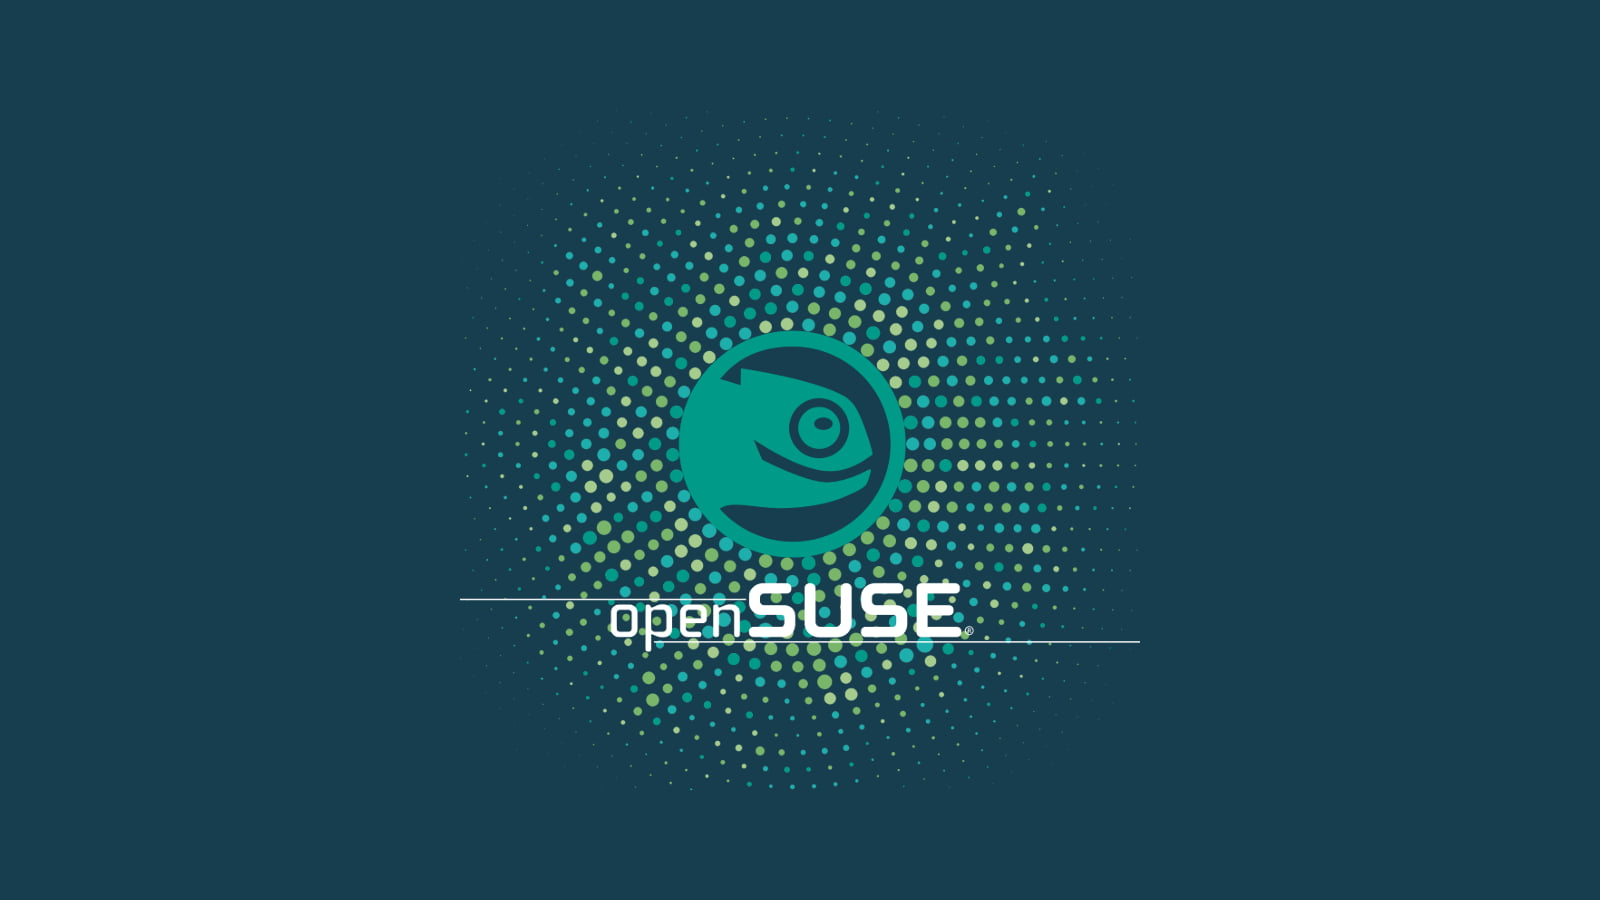 OpenSuse logo, openSUSE, Linux, gecko